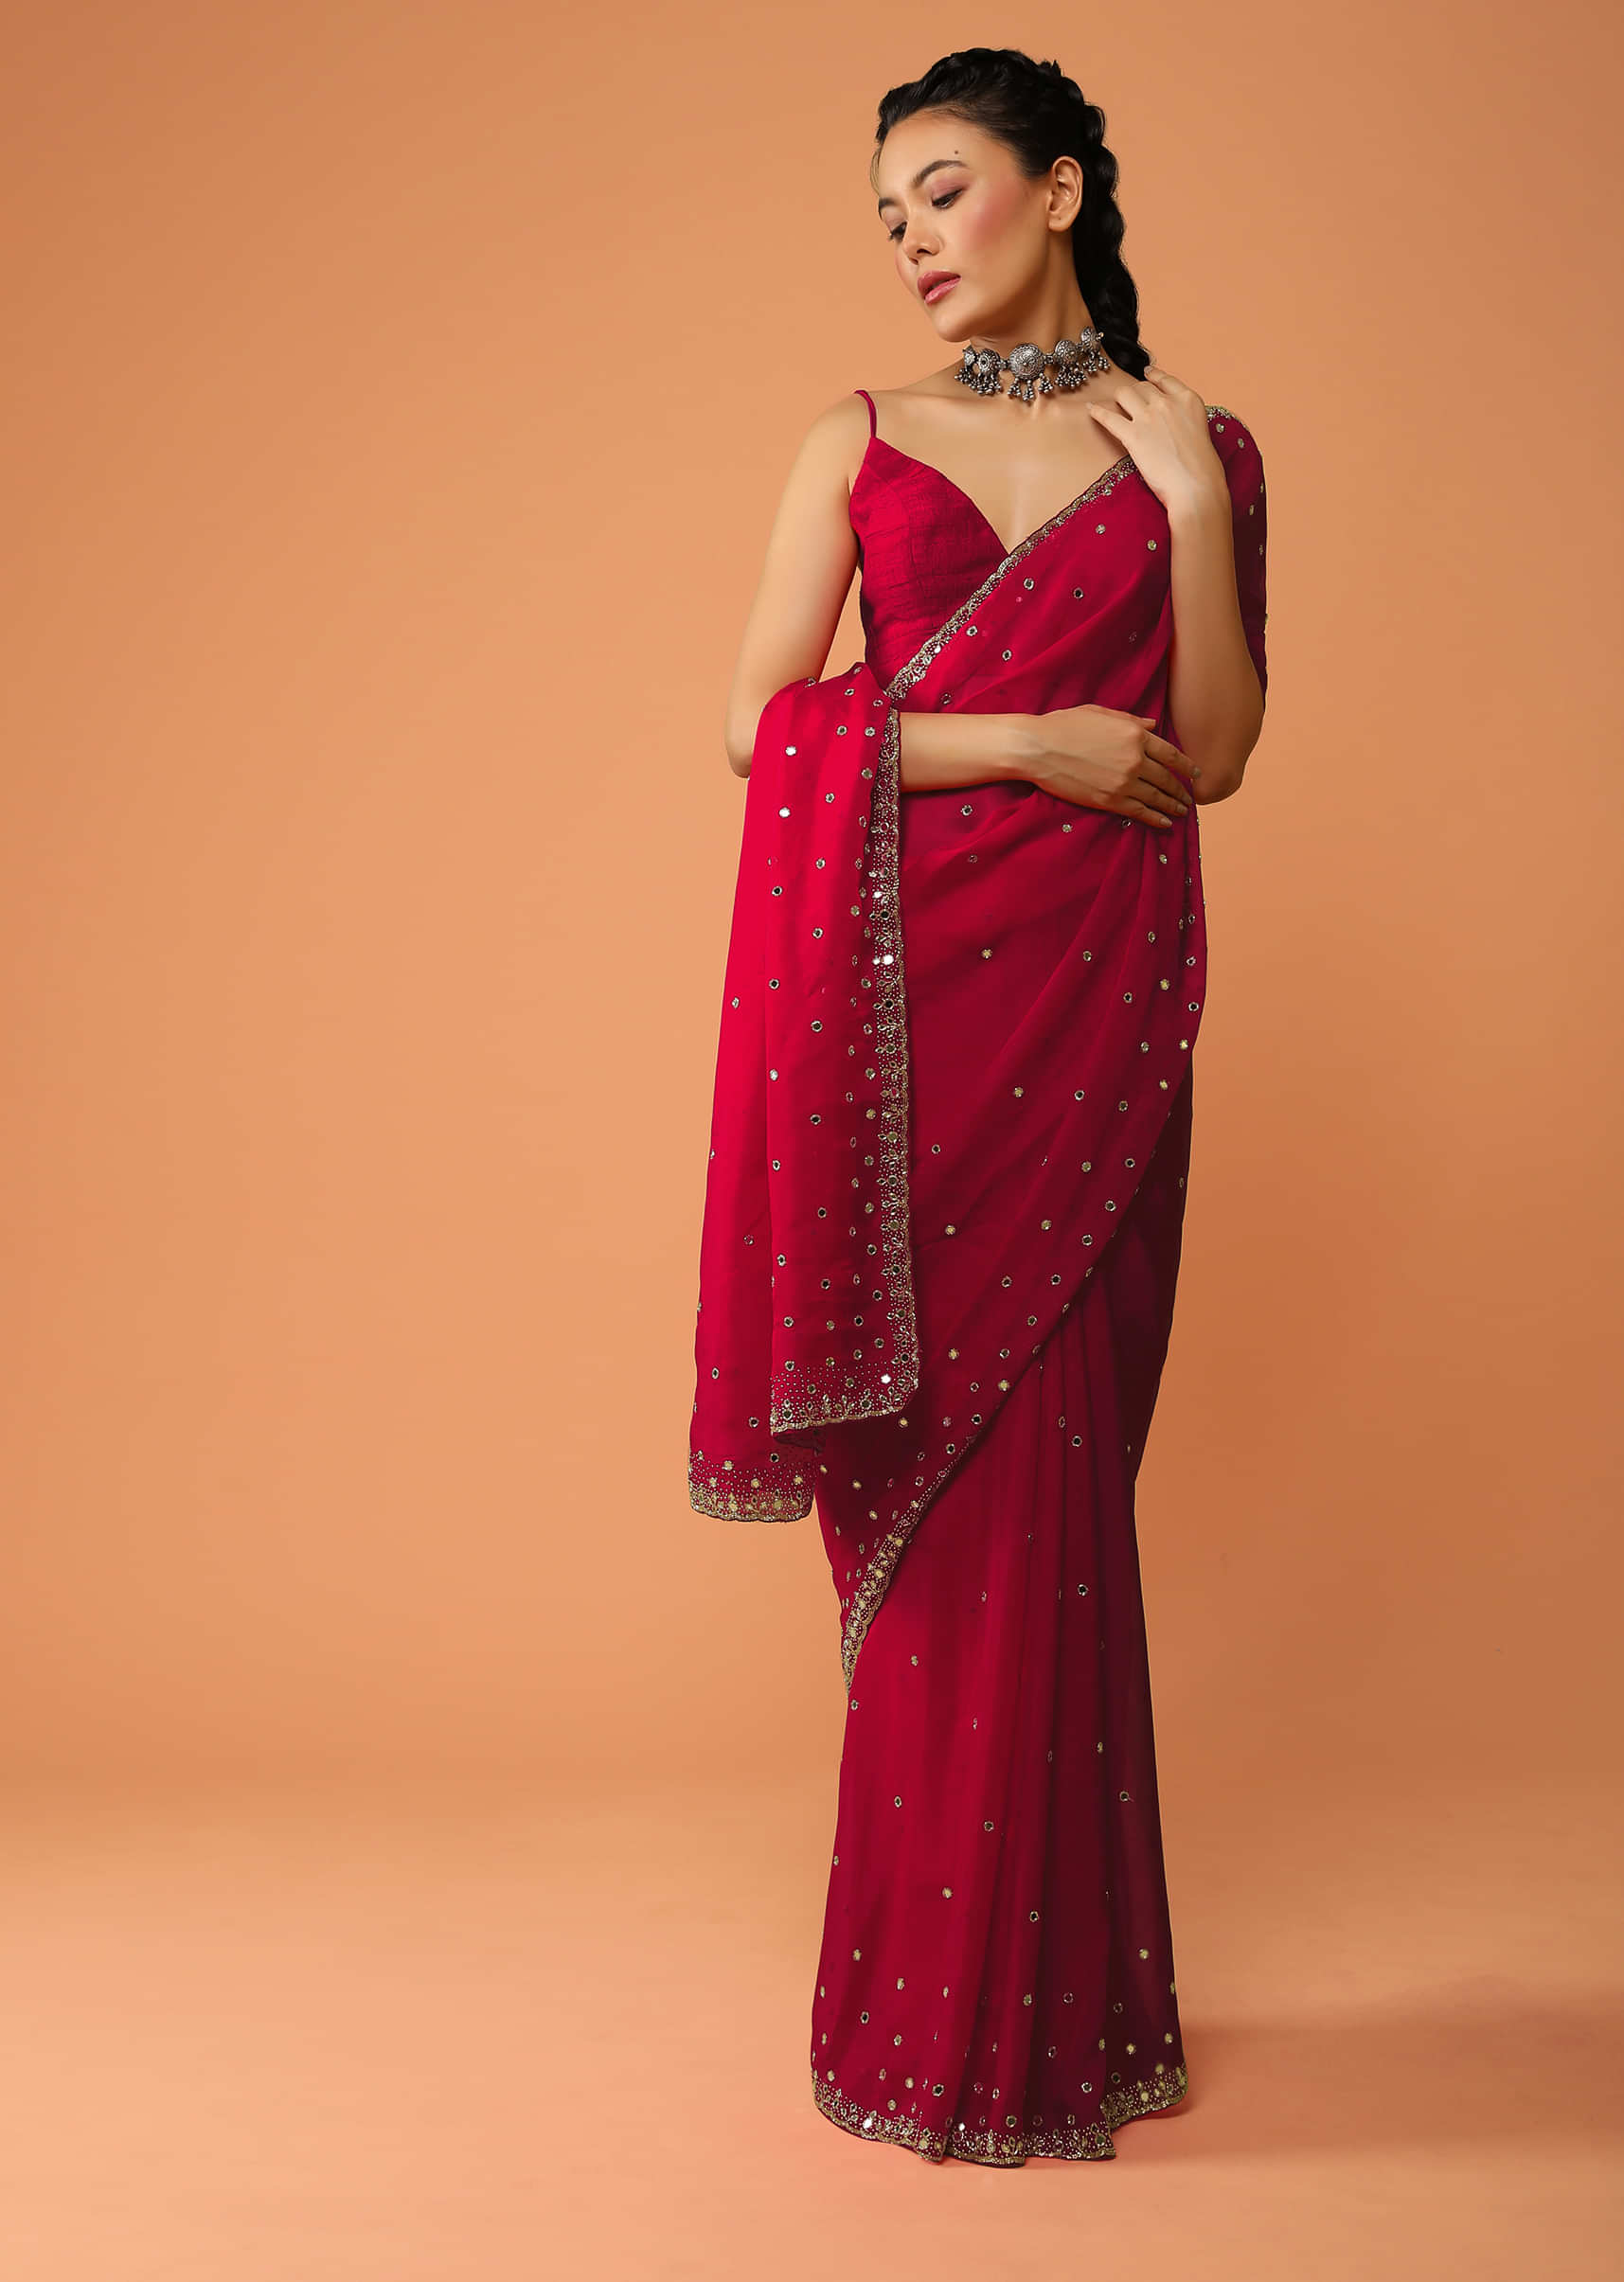 Fuchsia Pink Saree In Organza With Mirror And Cut Dana Embroidered Buttis And Border Design  